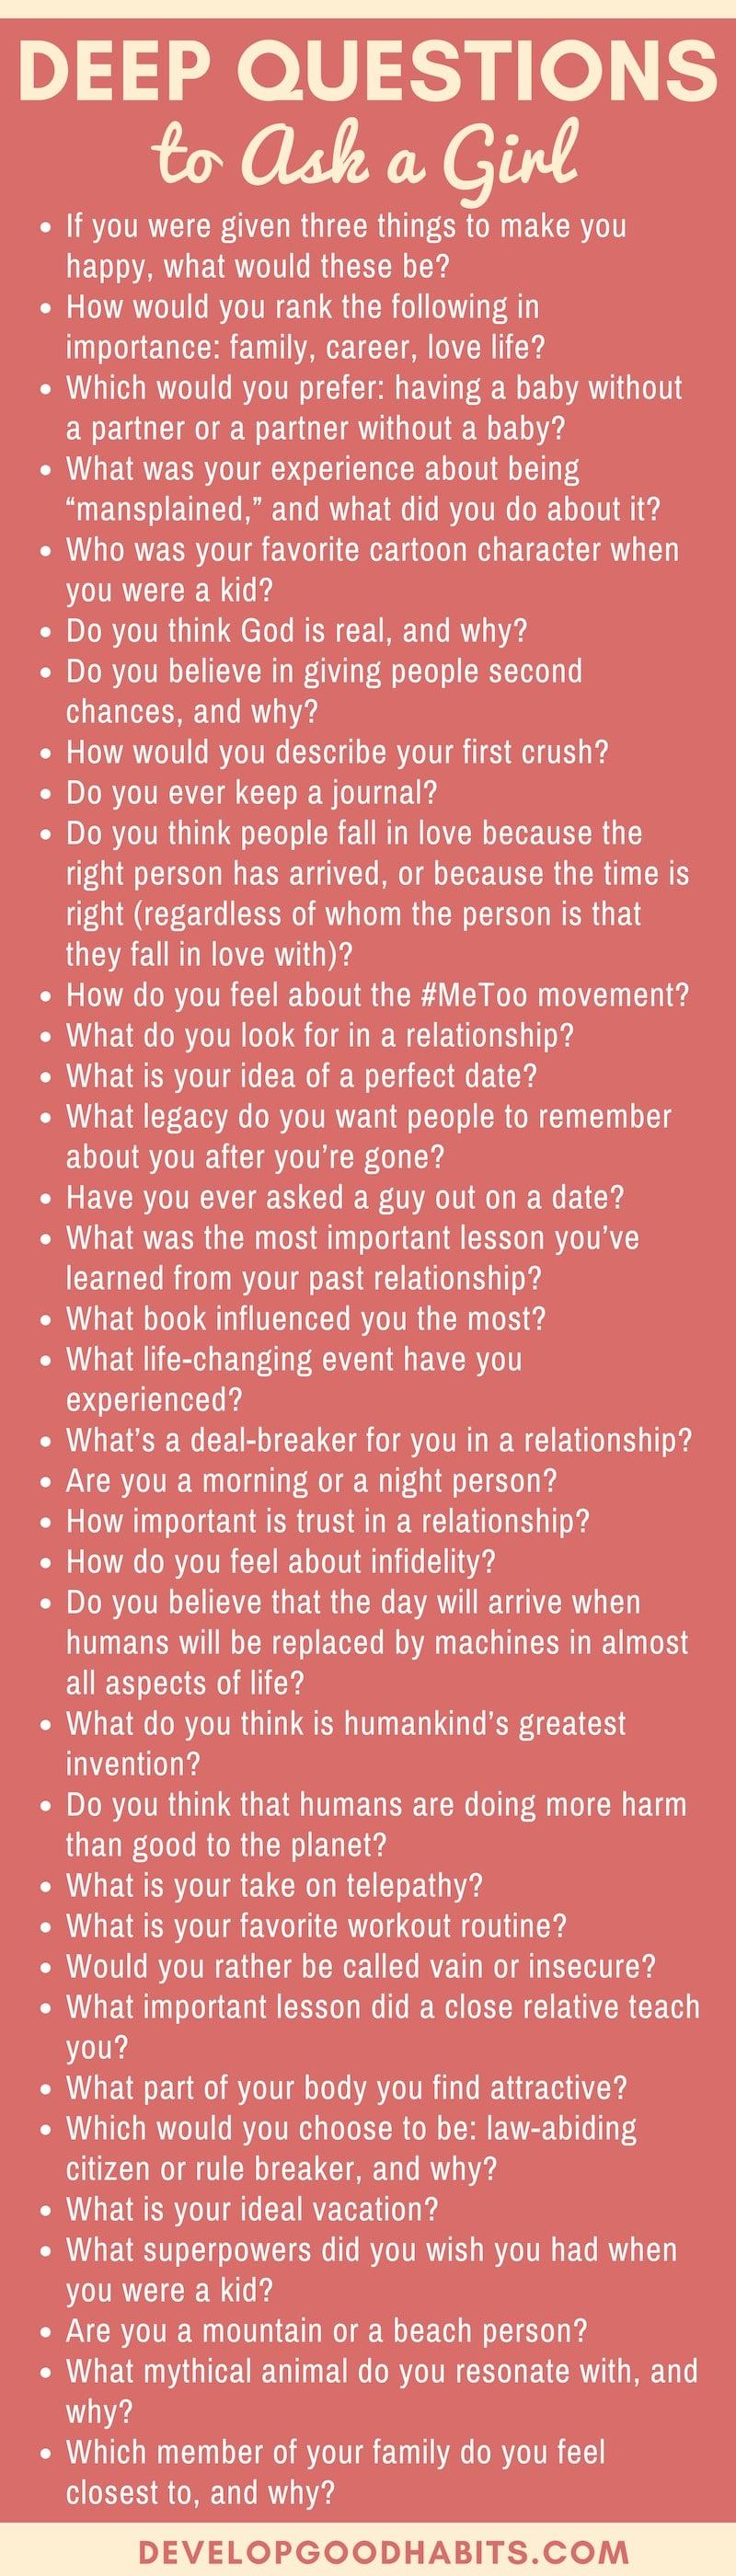 Use these relationship questions to ask and deep questions to ask a girl to help you discover the things she values the most.